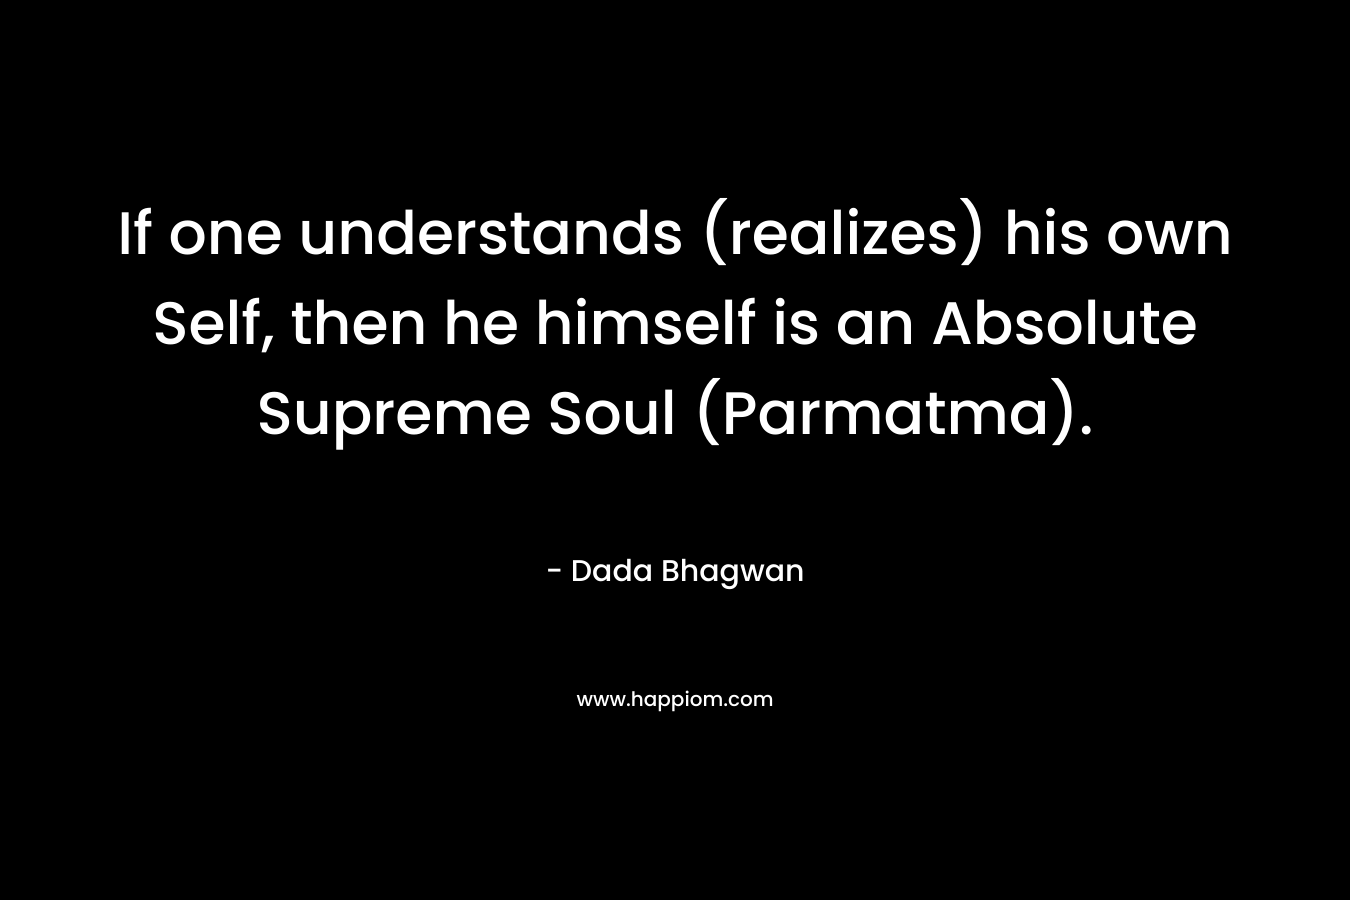 If one understands (realizes) his own Self, then he himself is an Absolute Supreme Soul (Parmatma). – Dada Bhagwan